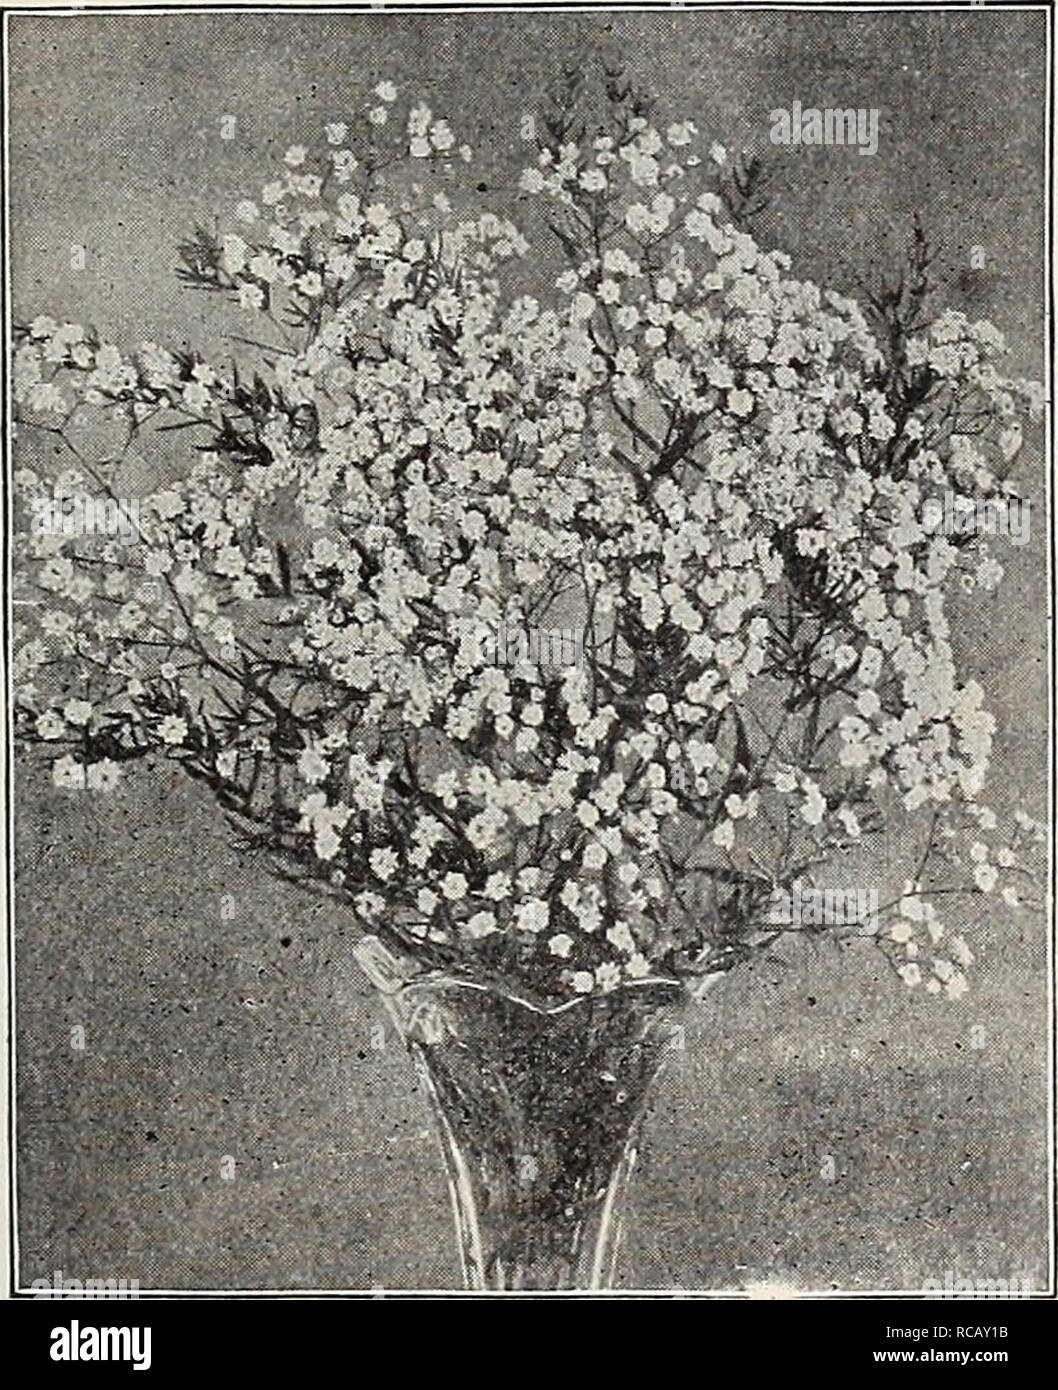 . Dreer's garden book : seventy-third annual edition 1911. Seeds Catalogs; Nursery stock Catalogs; Gardening Equipment and supplies Catalogs; Flowers Seeds Catalogs; Vegetables Seeds Catalogs; Fruit Seeds Catalogs. Undulatum. Hardy Fern, Scolopendrium Officinarum GENISTA TINCTORIA FL. PE. A double-flowering Broom growing about 2 feet high and producing masses of pretty double yellow flowers in May and June. While an excellent subject for the hardy border, it is especially valuable as a rock plant. 35 cts. each. GENTIANA SCABRA BUERGERI. A perfectly hardy Japanese species of the blue Gentian, w Stock Photo